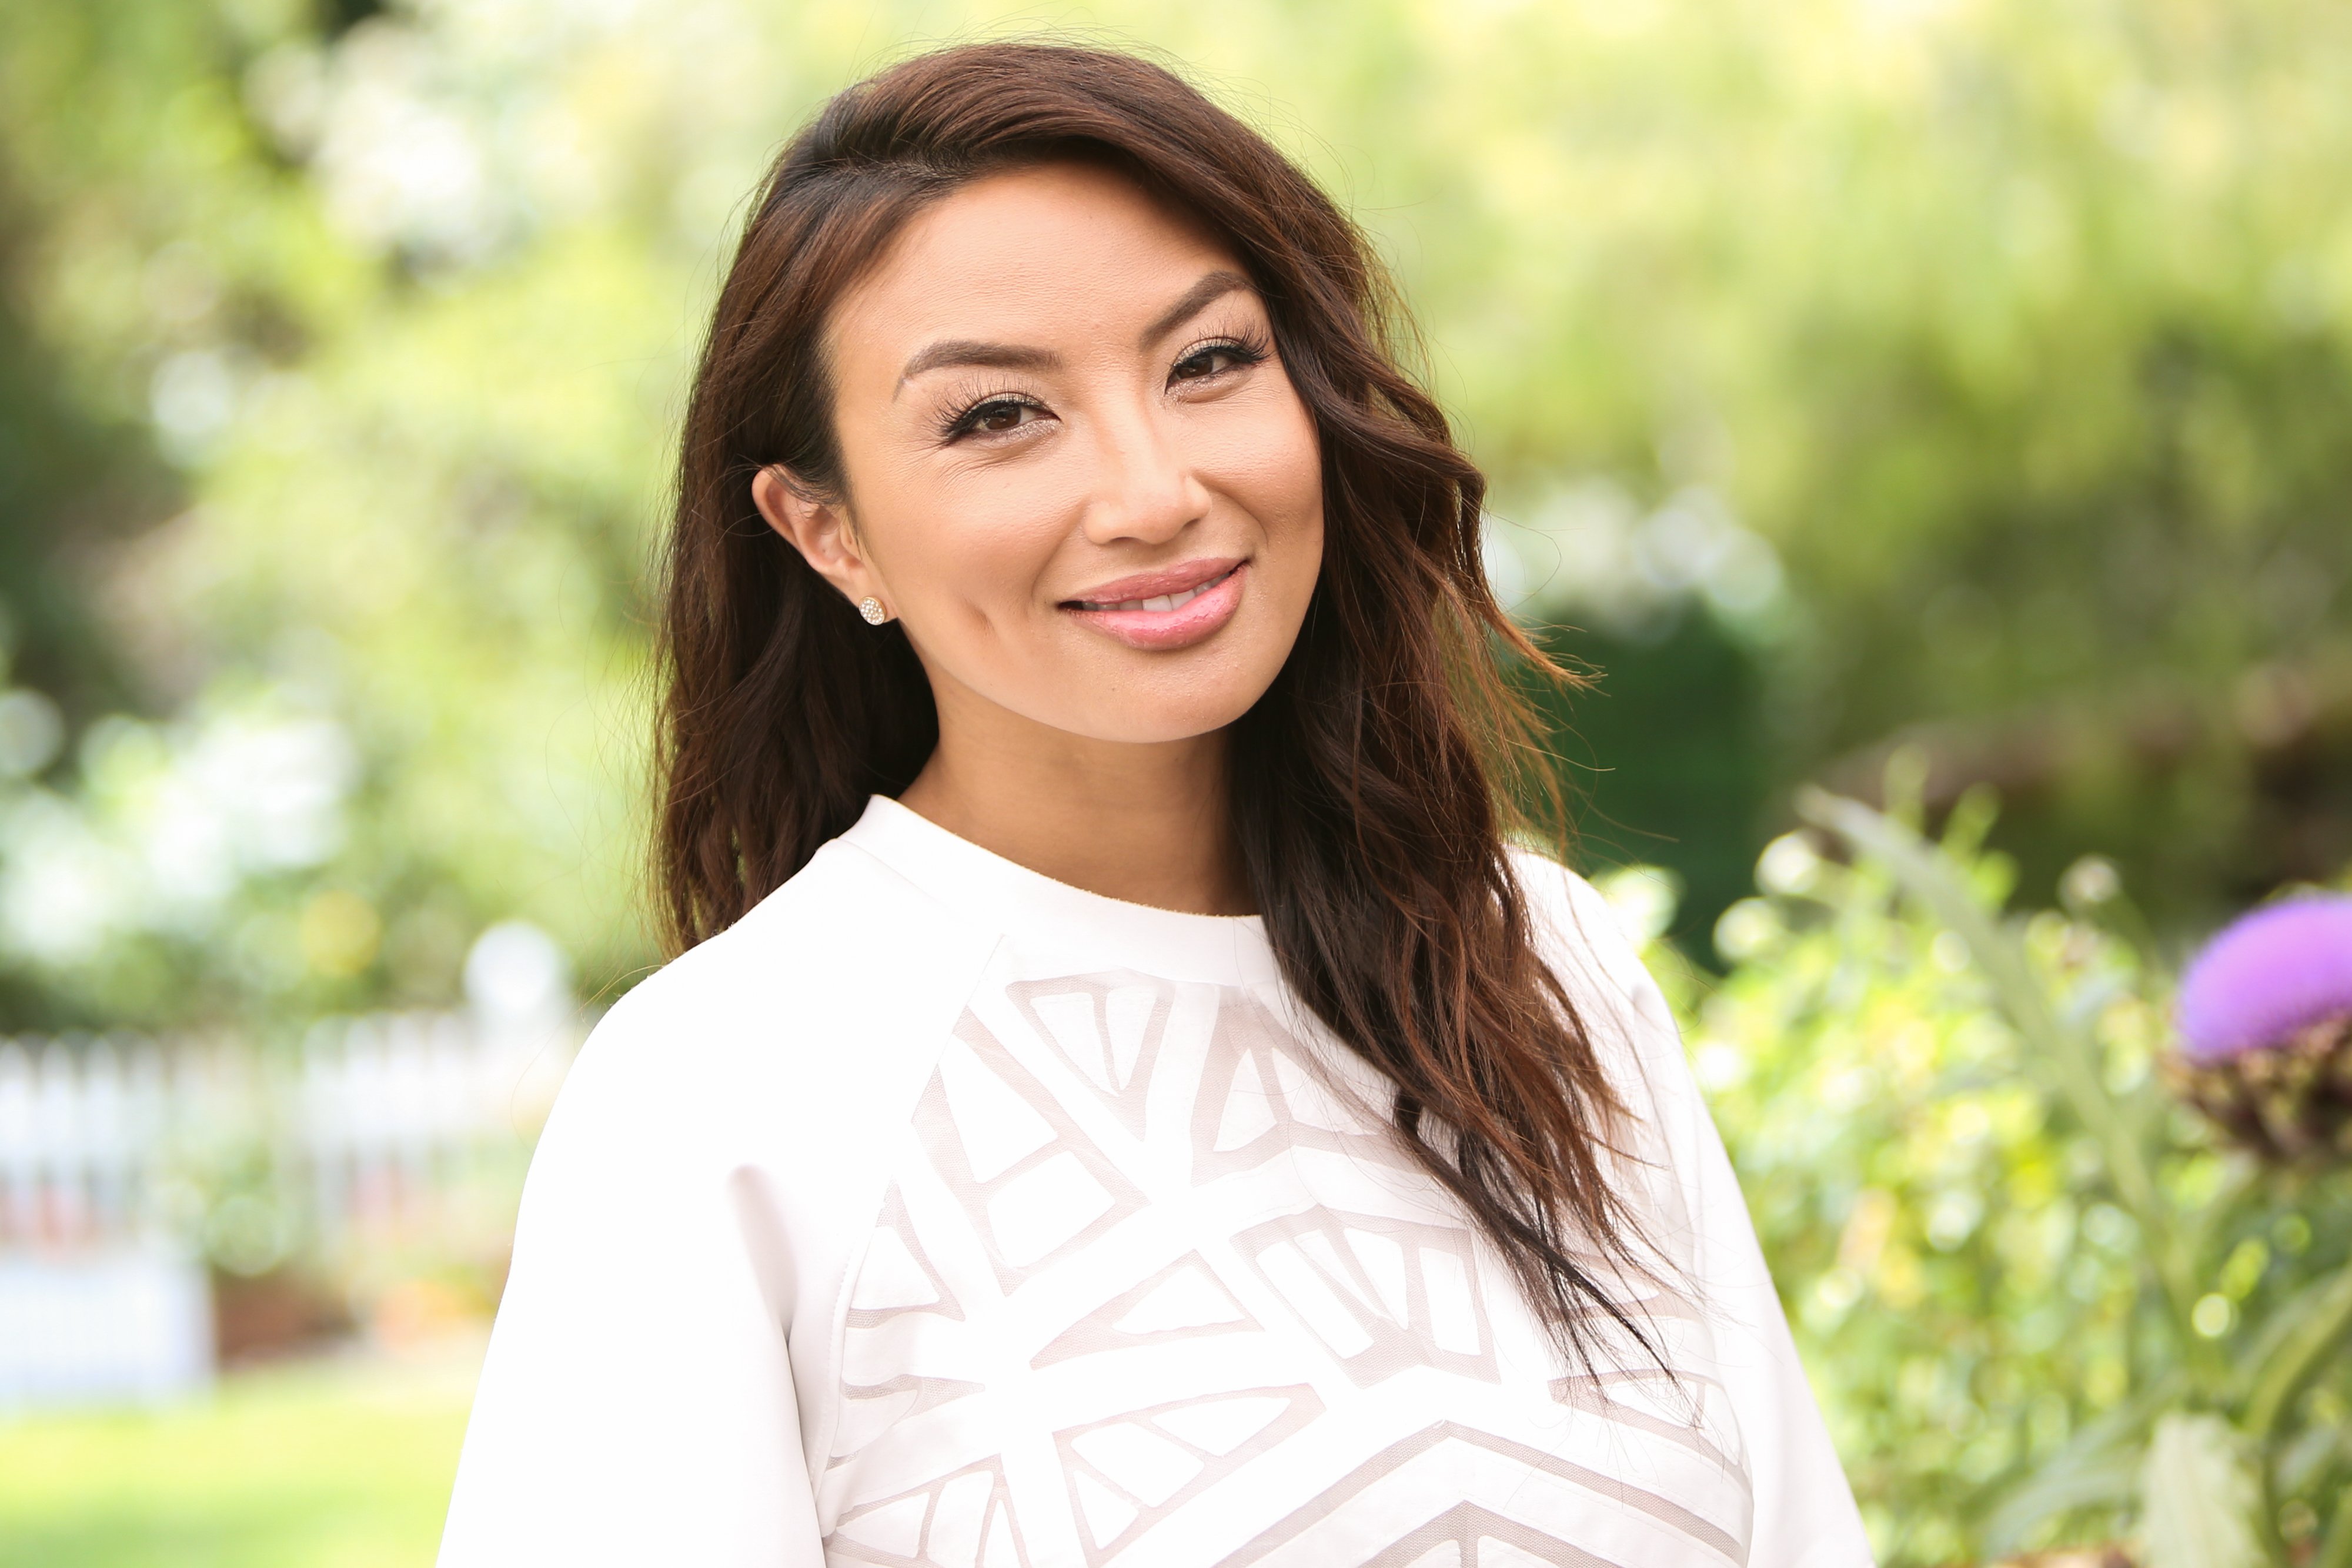 Jeannie Mai poses at Hallmark's "Home & Family" at Universal Studios Hollywood on June 11, 2019. | Source: Getty Images